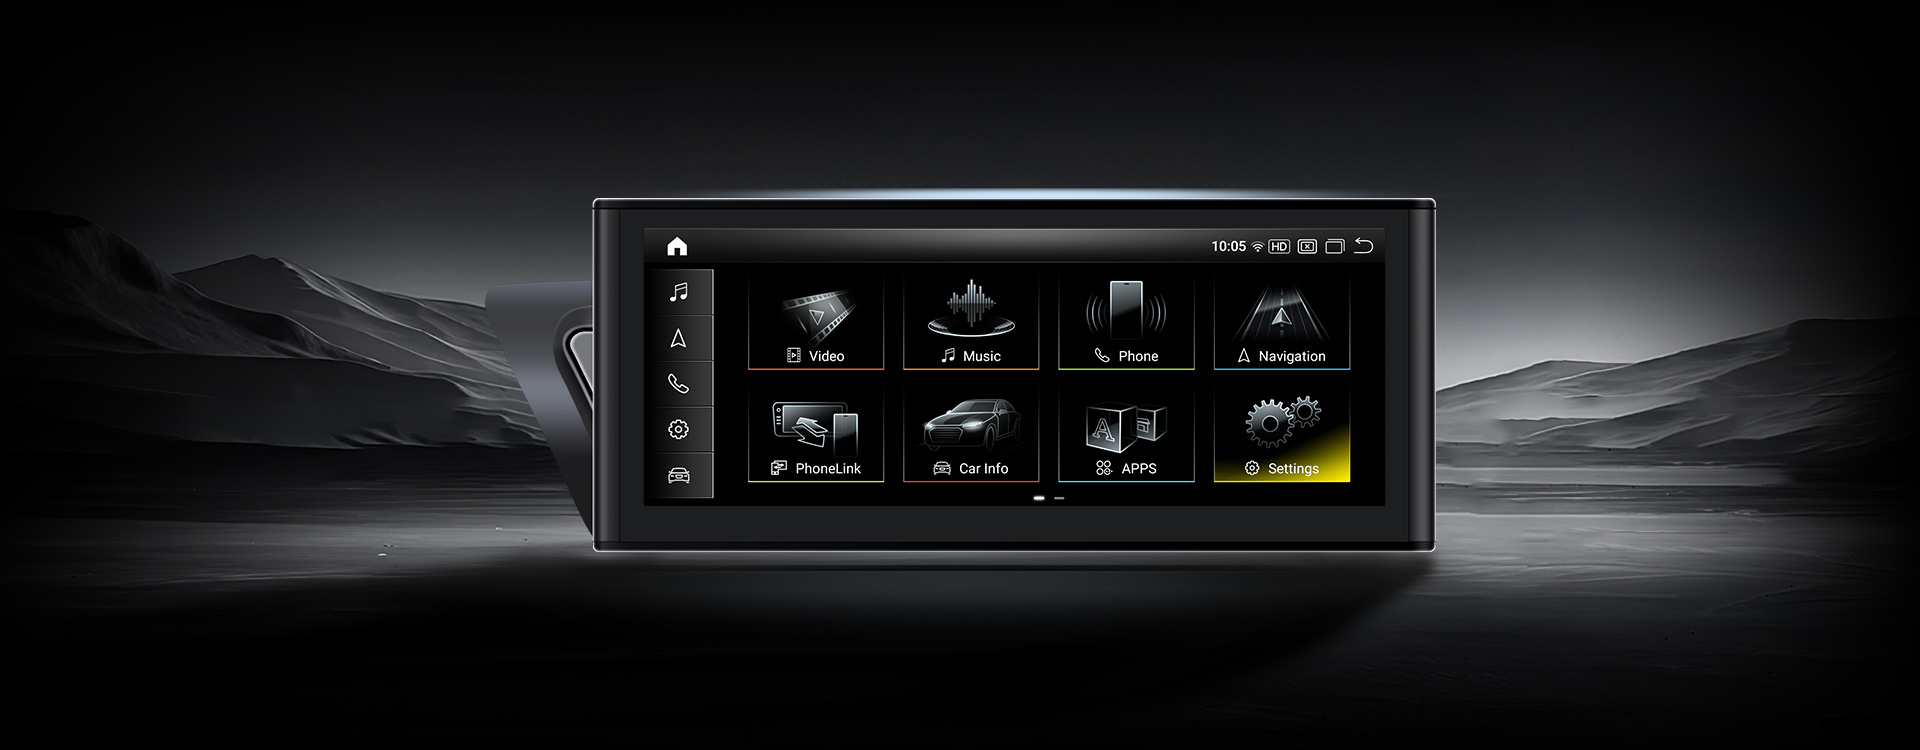 Abdroid-for-audi-10.25-12.3inch-banner1